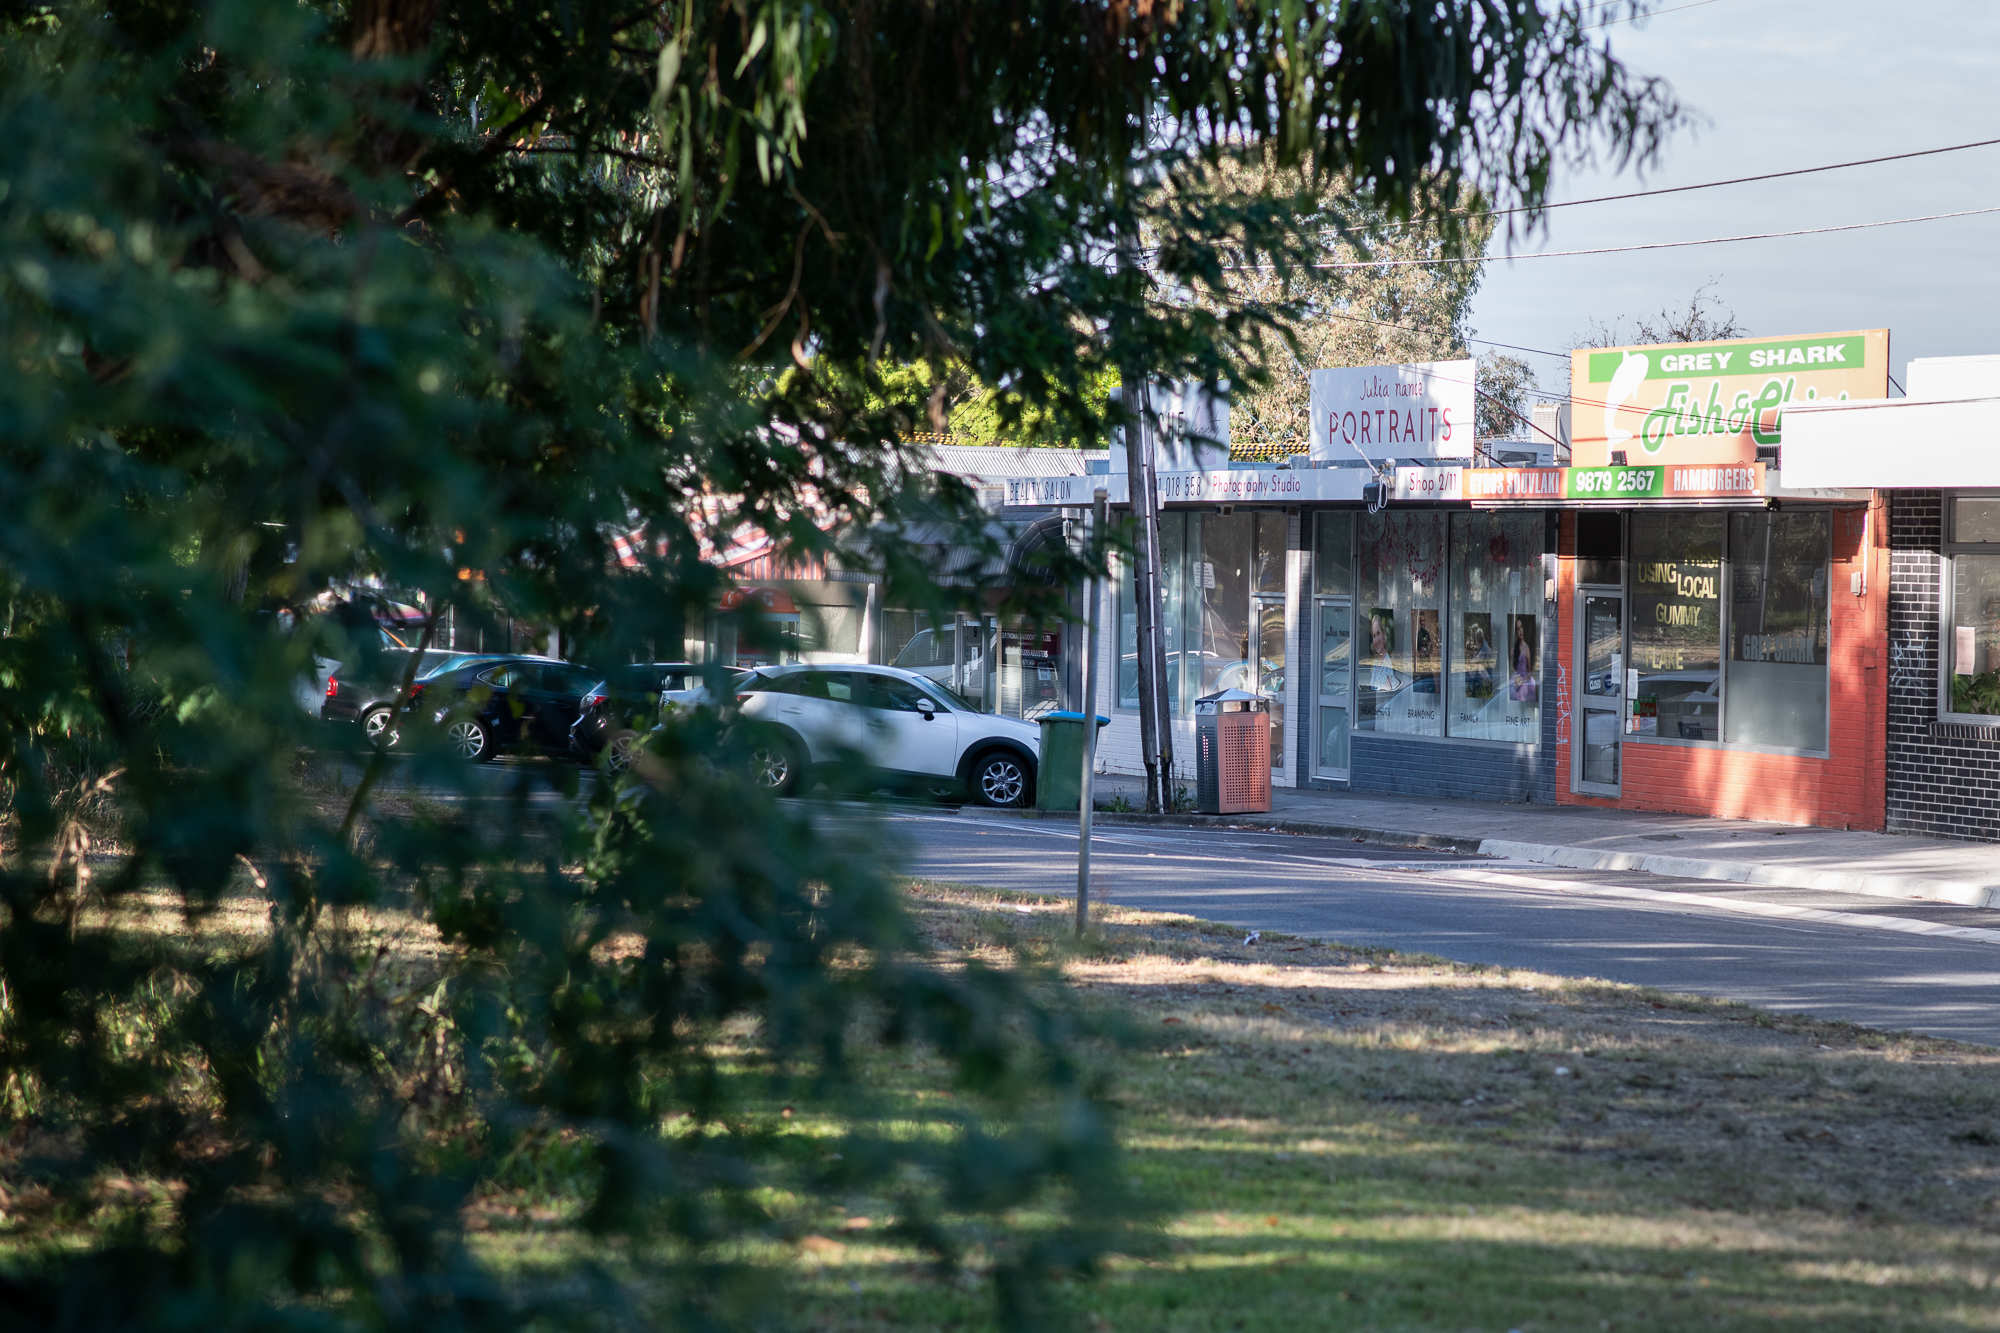 The studio surrounds of the Julia Nance Portraits photography studio. Image shows australian trees and fauna in the foreground and the Old Lilydale Road shops in the background.